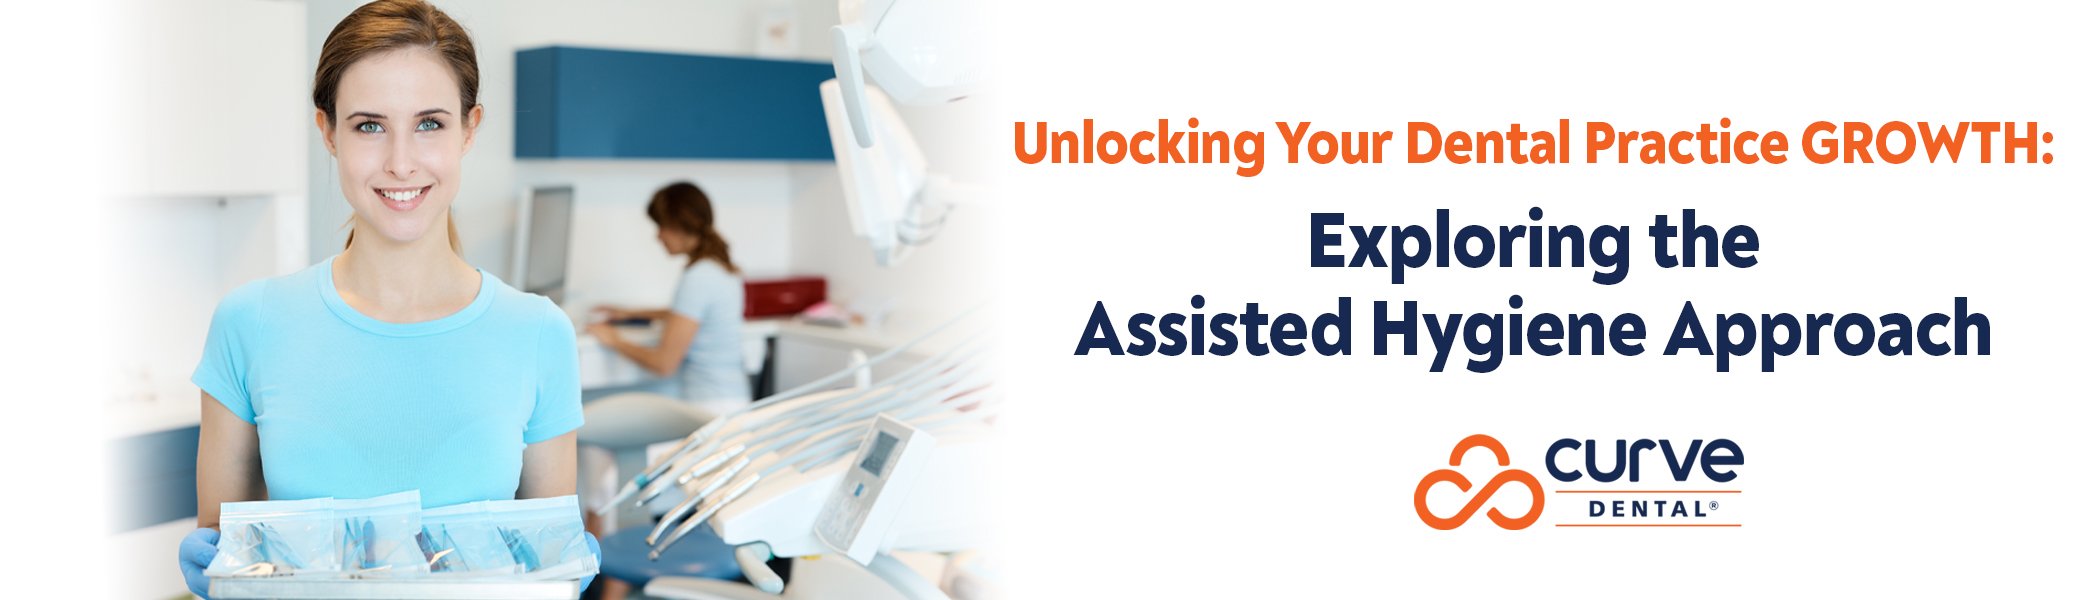 Unlocking Your Dental Practice Growth: Exploring the Assisted Hygiene Approach